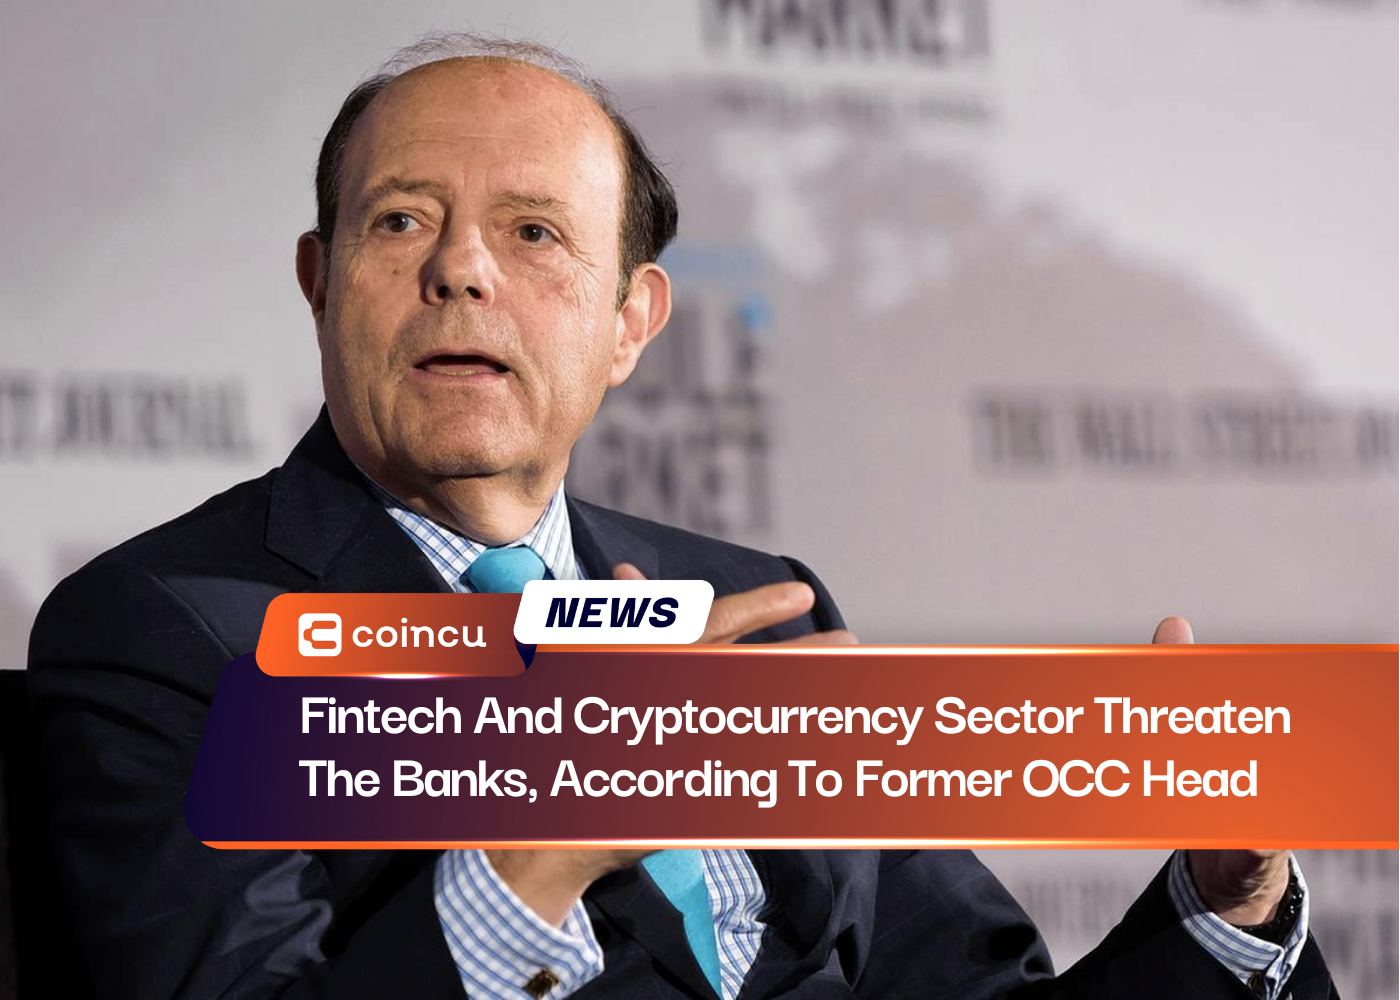 Fintech And Cryptocurrency Sector Threaten The Banks, According To Former OCC Head